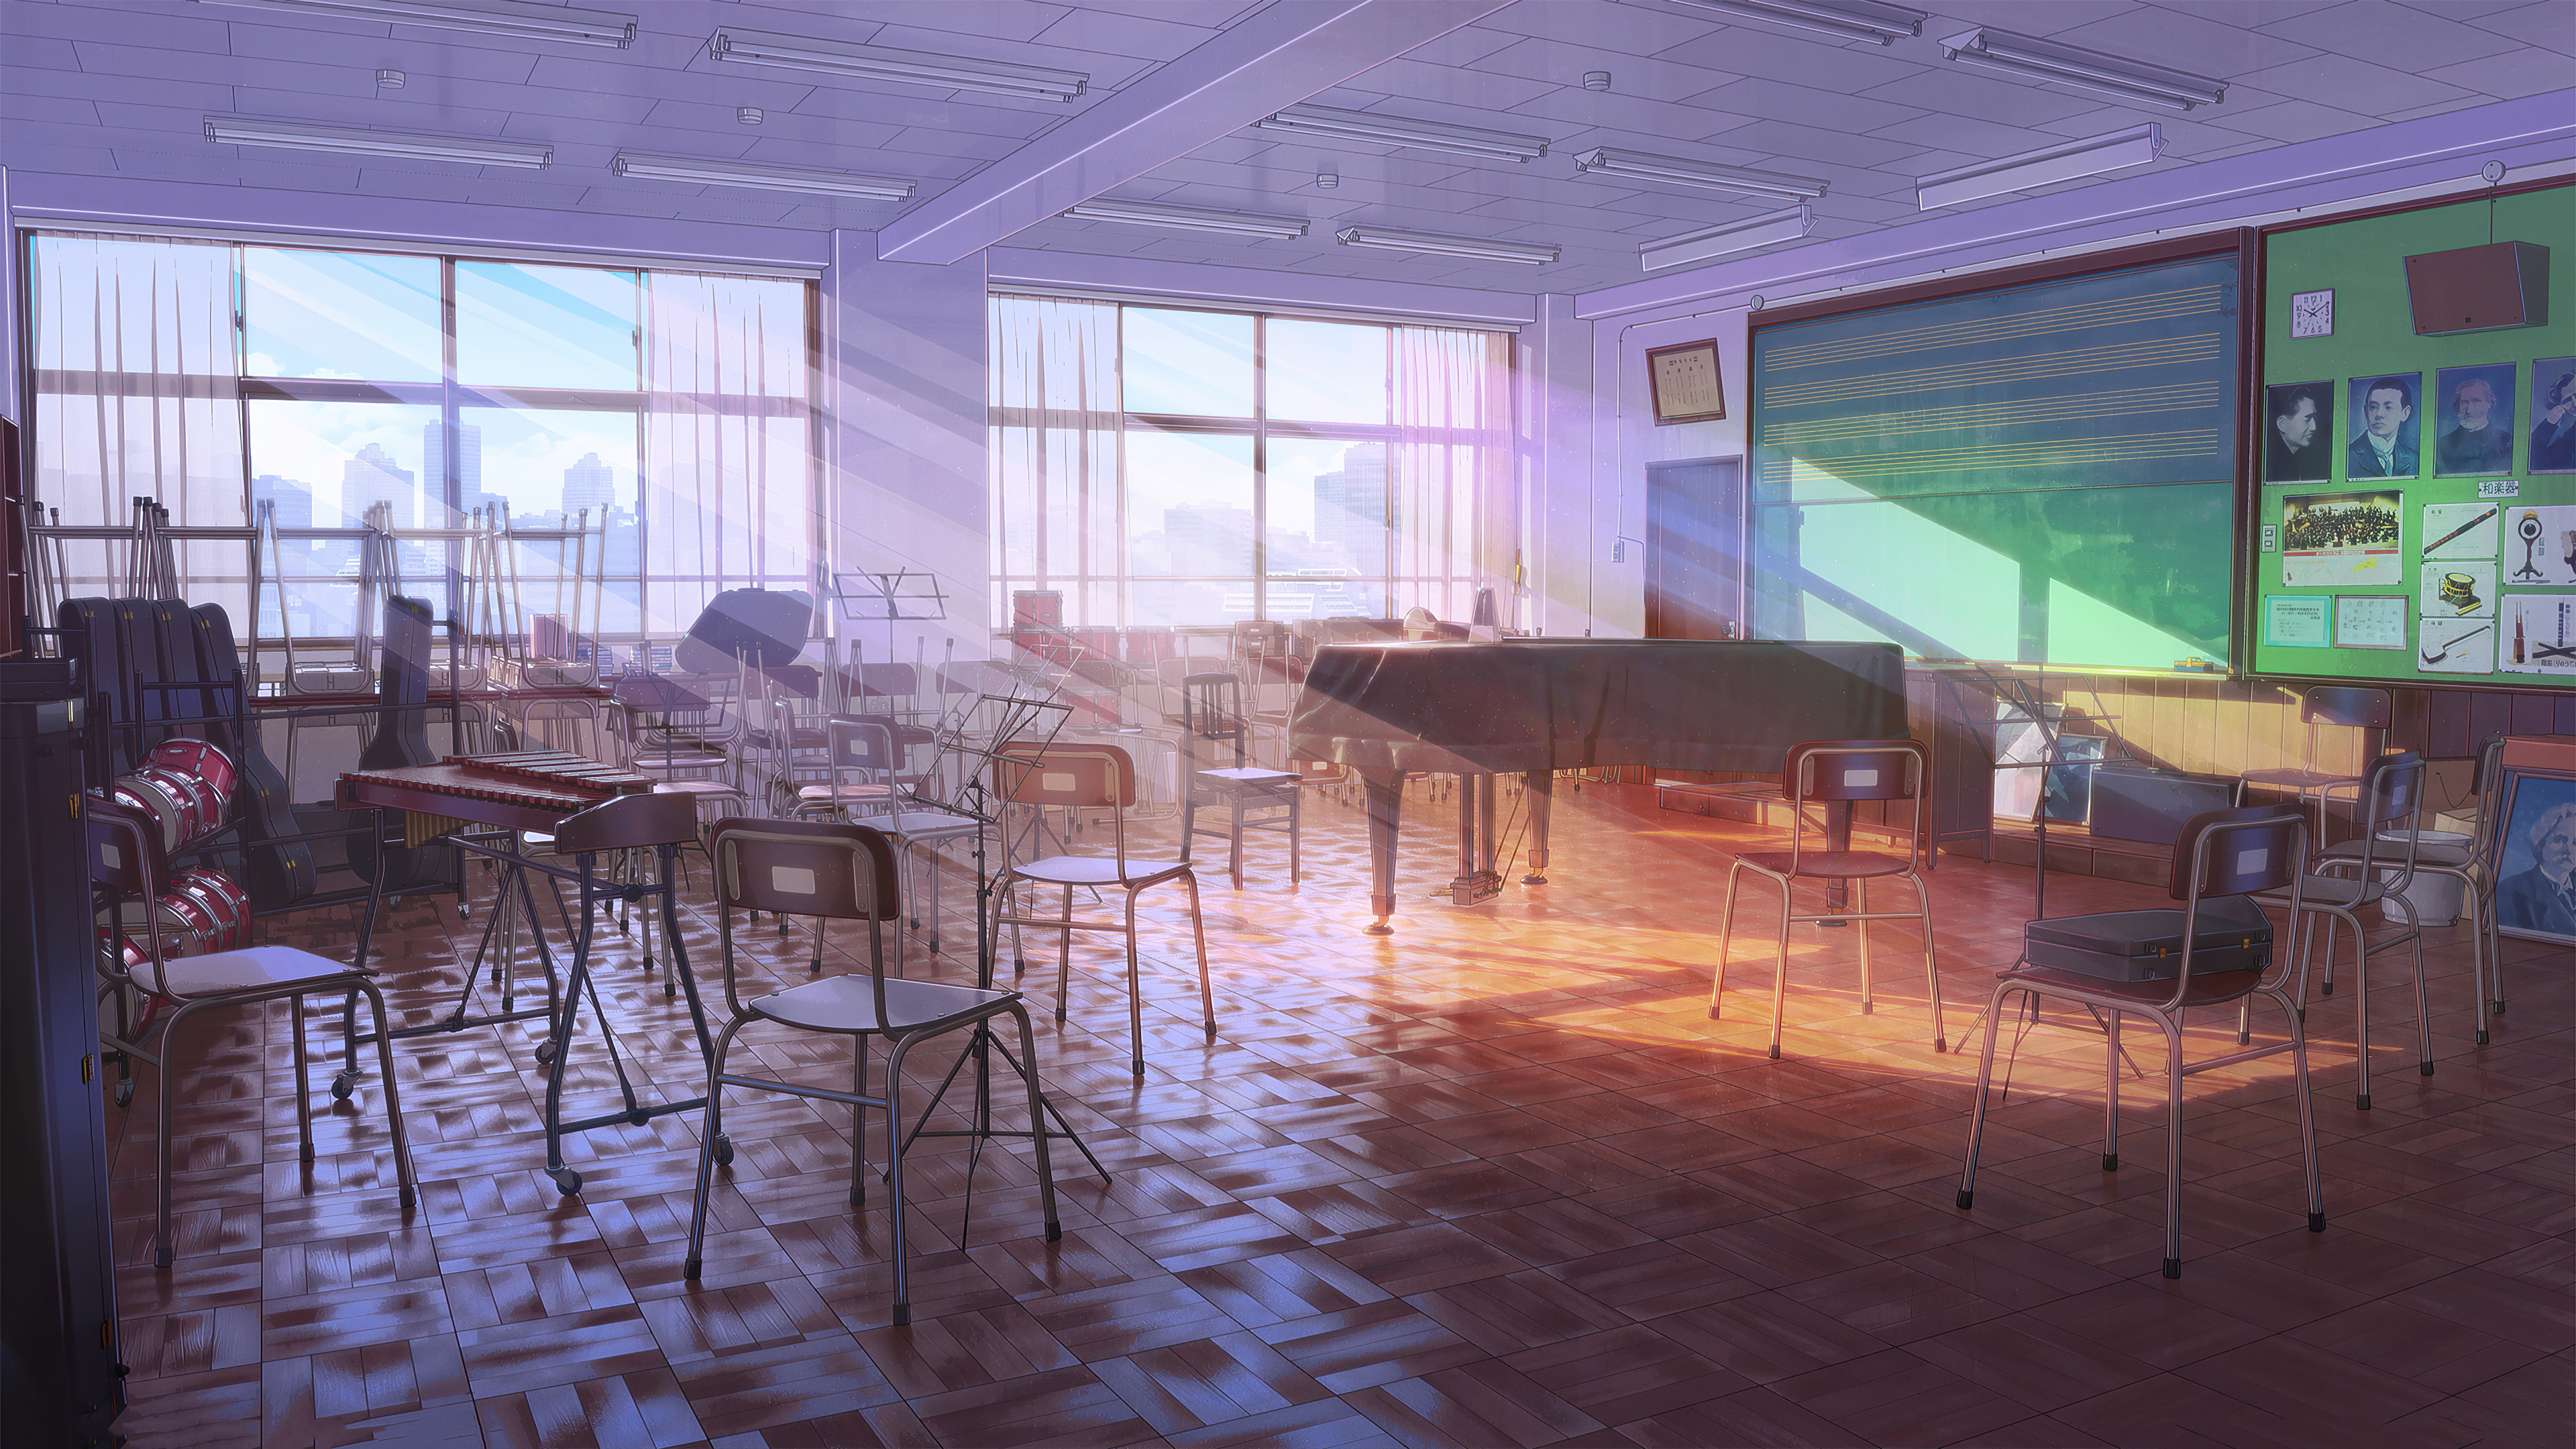 dismal-toad5: anime background high school classroom, night time